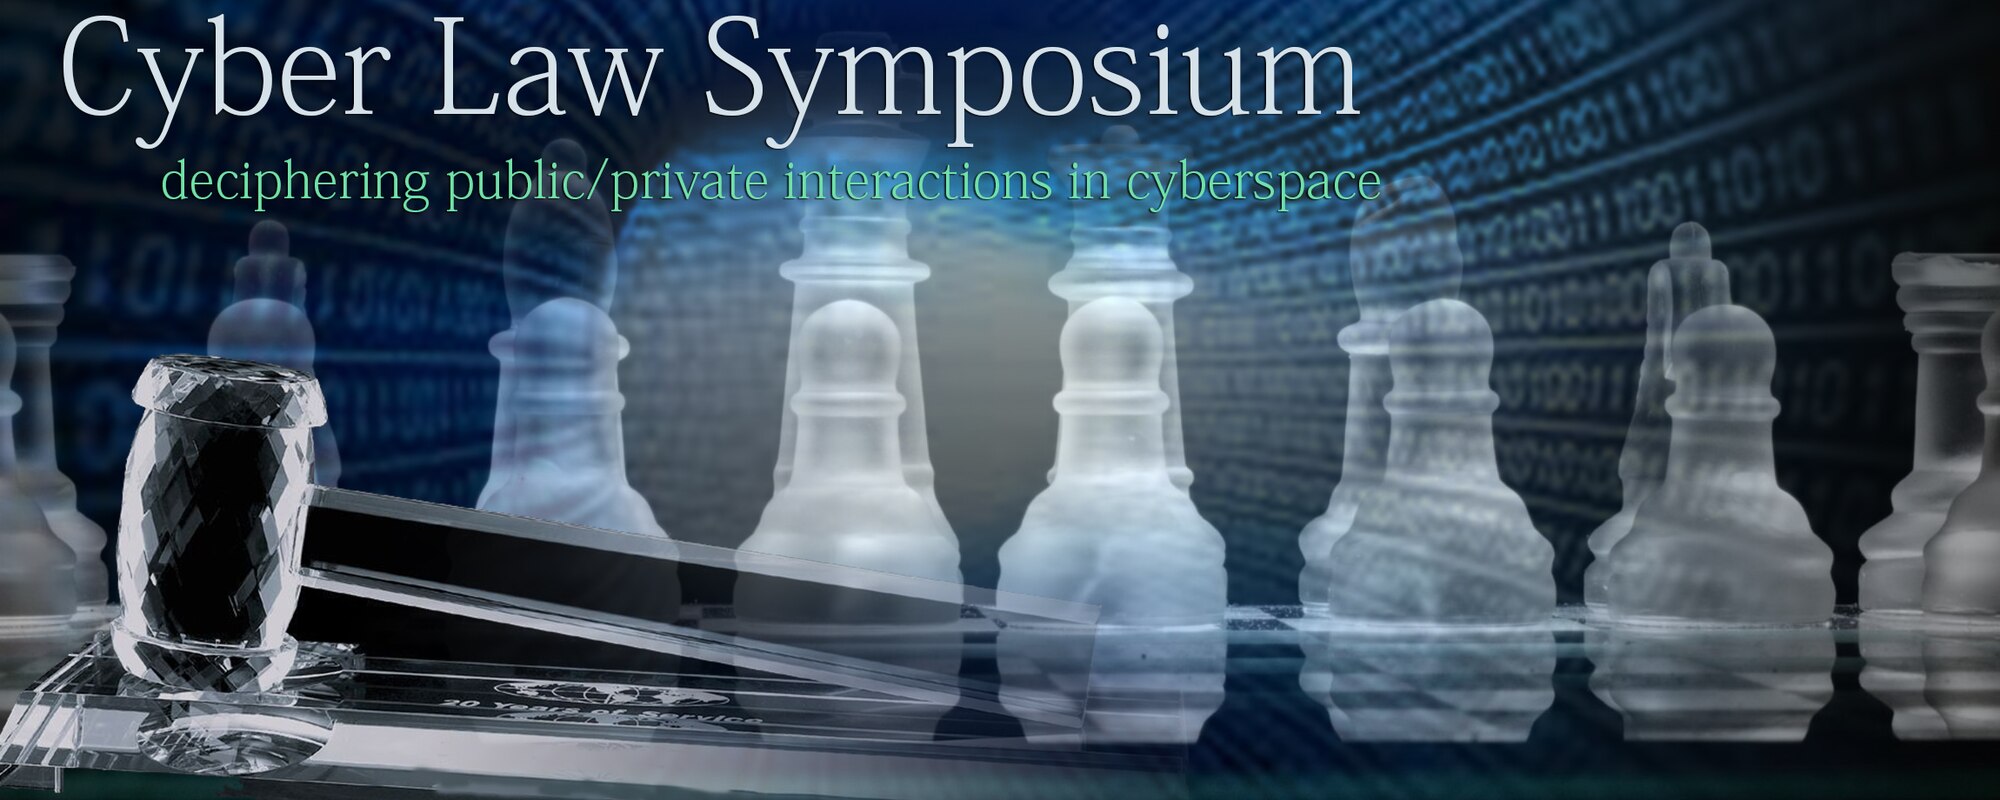 The Air Force Judge Advocate General’s School at Maxwell AFB, Ala., invites legal, cyber and information technology professionals and university faculty and students studying in these areas to attend its first cyber law symposium, Dec. 15, 8 a.m. to 5 p.m.